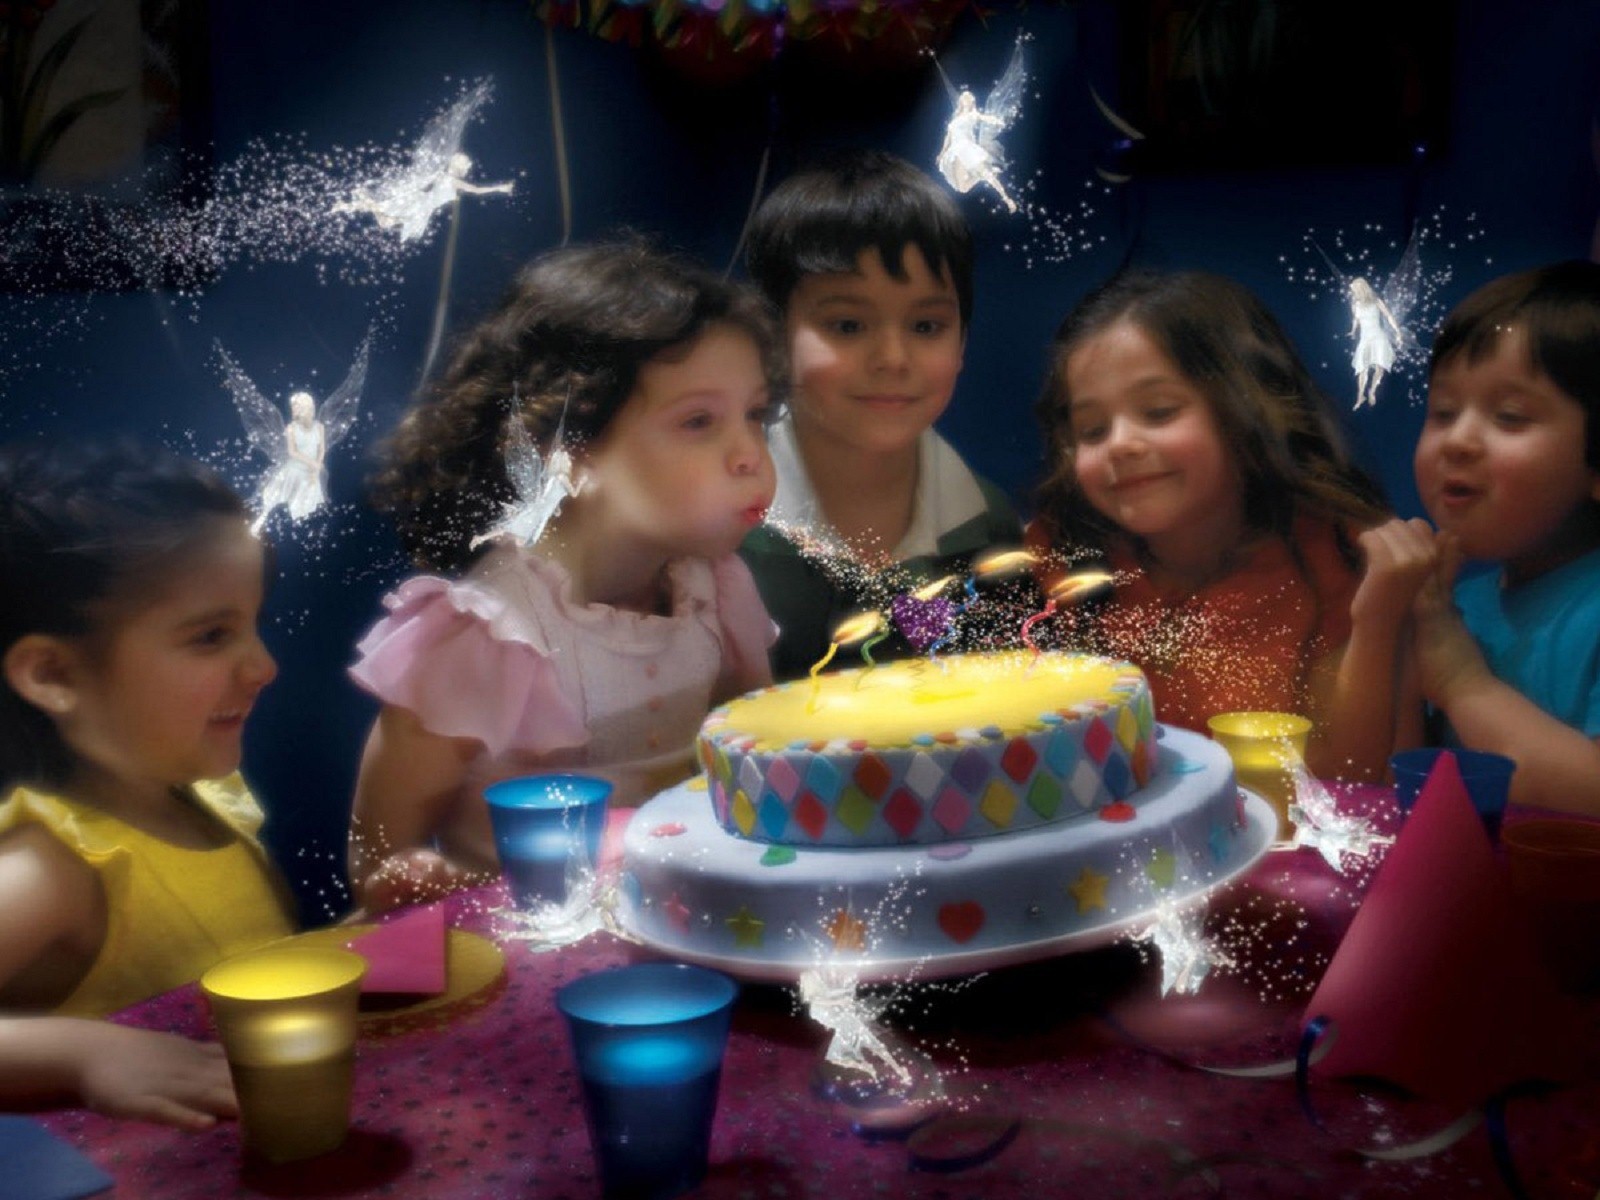 Cute Childrens In Birthday Party Hd Wallpapers - Birthday Parties Image Hd - HD Wallpaper 